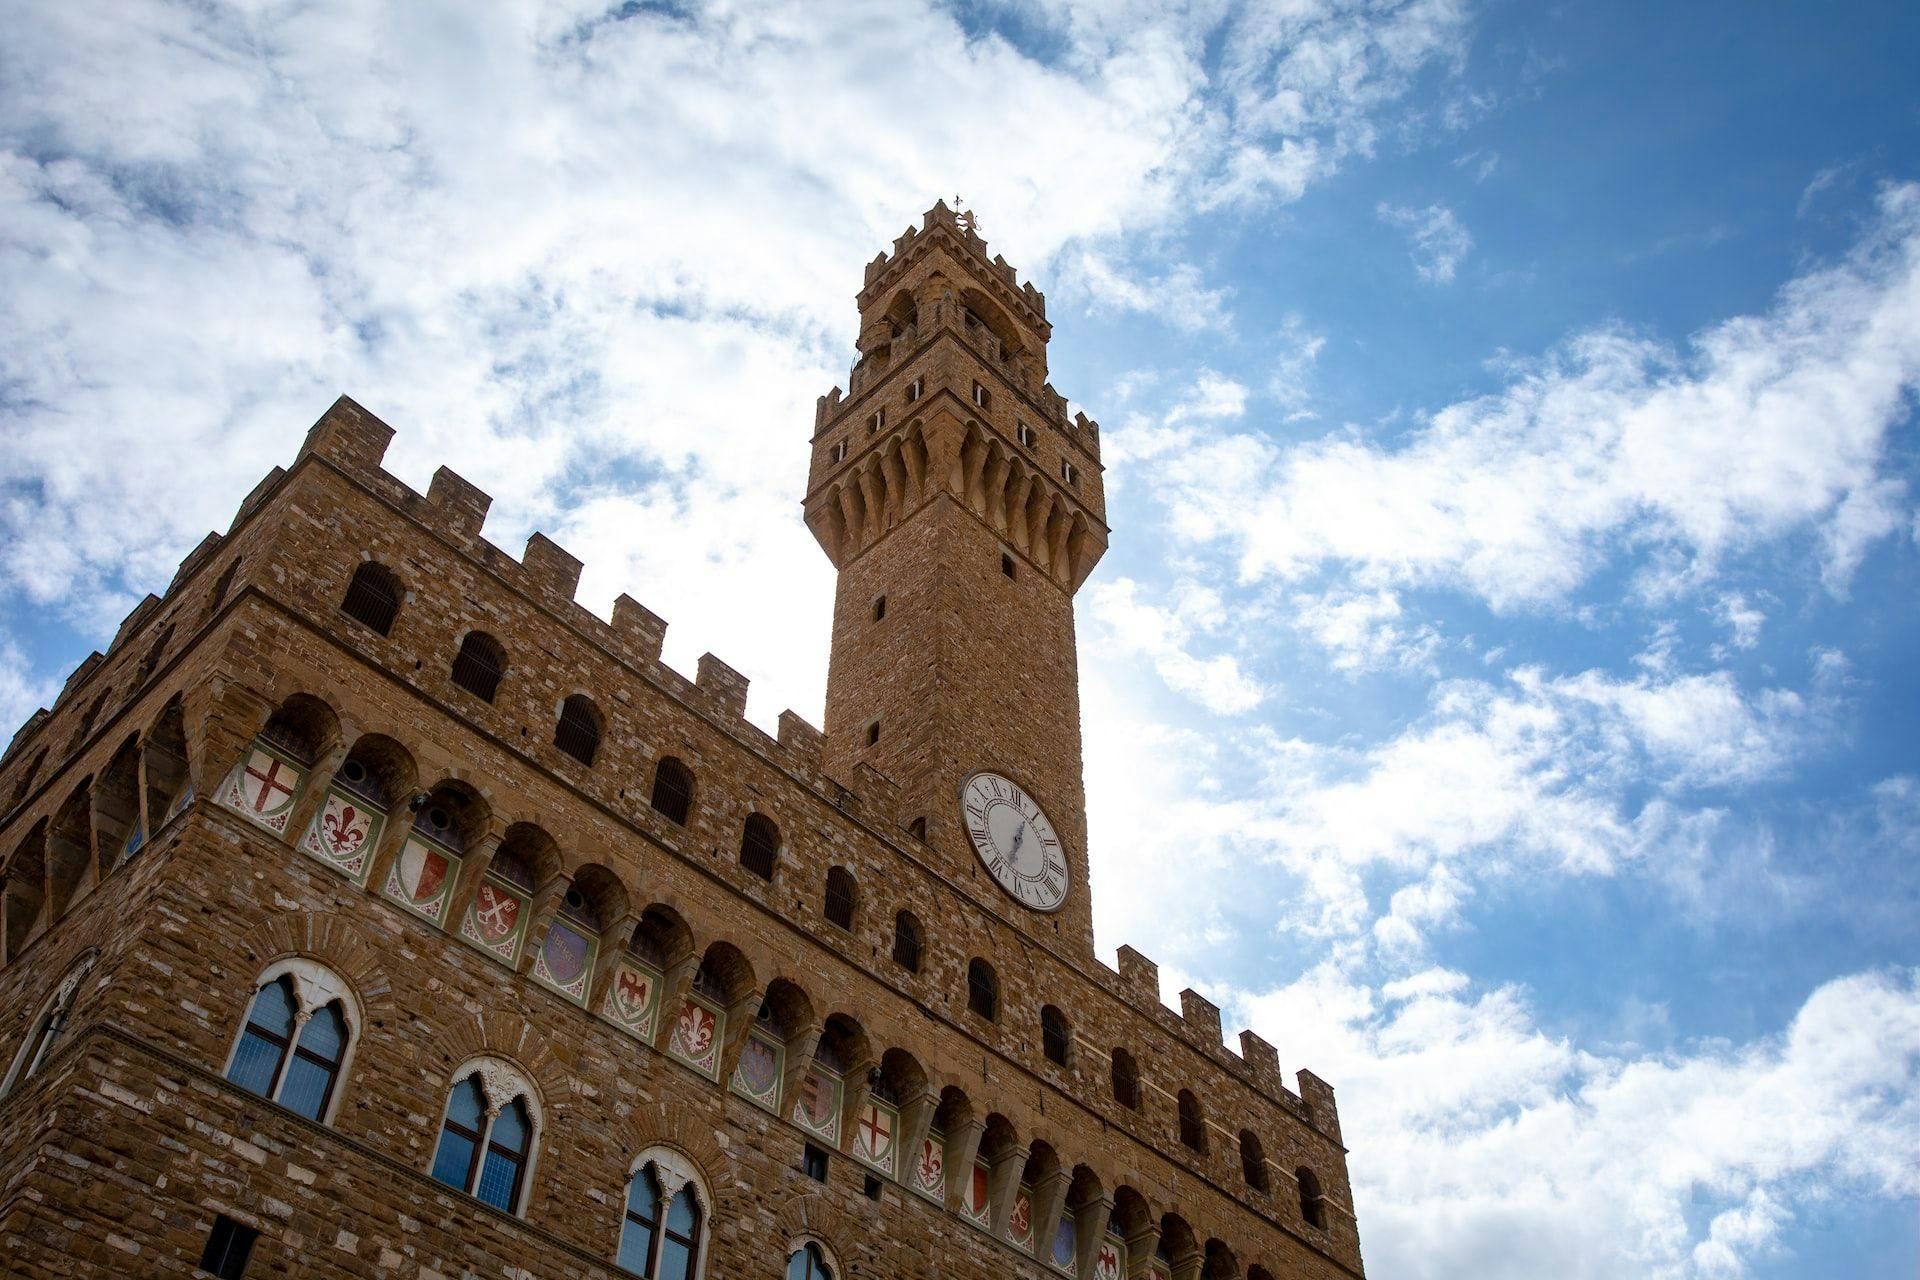 Palazzo Vecchio, in which the Roman theater museum is located.